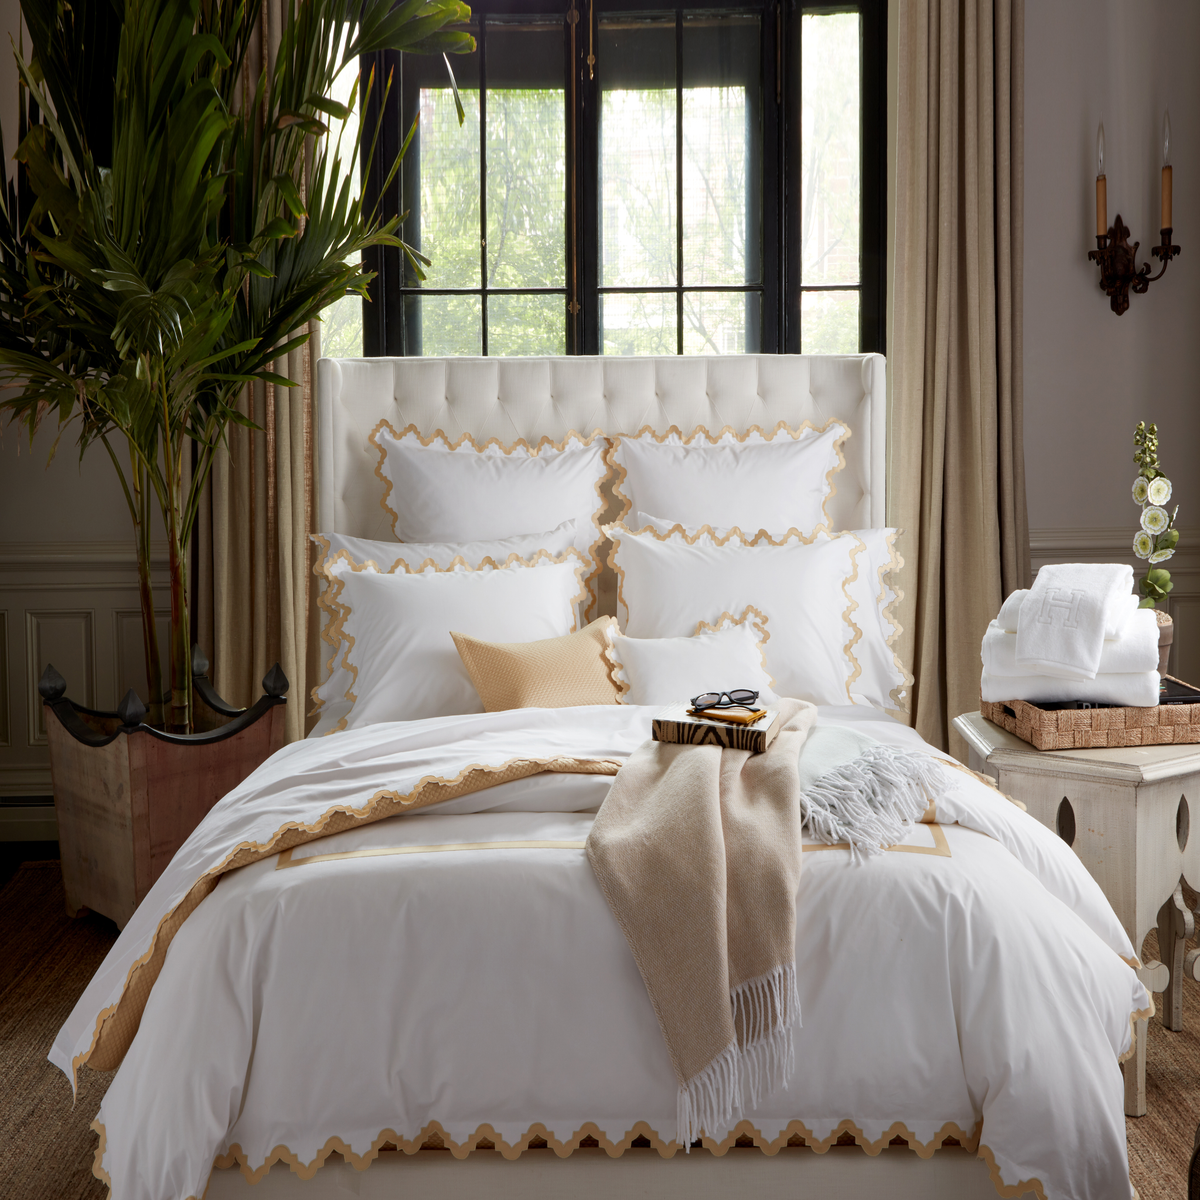 Lifestyle Image of a Full Bed Dressed in Matouk Aziza Bedding in Champagne Color